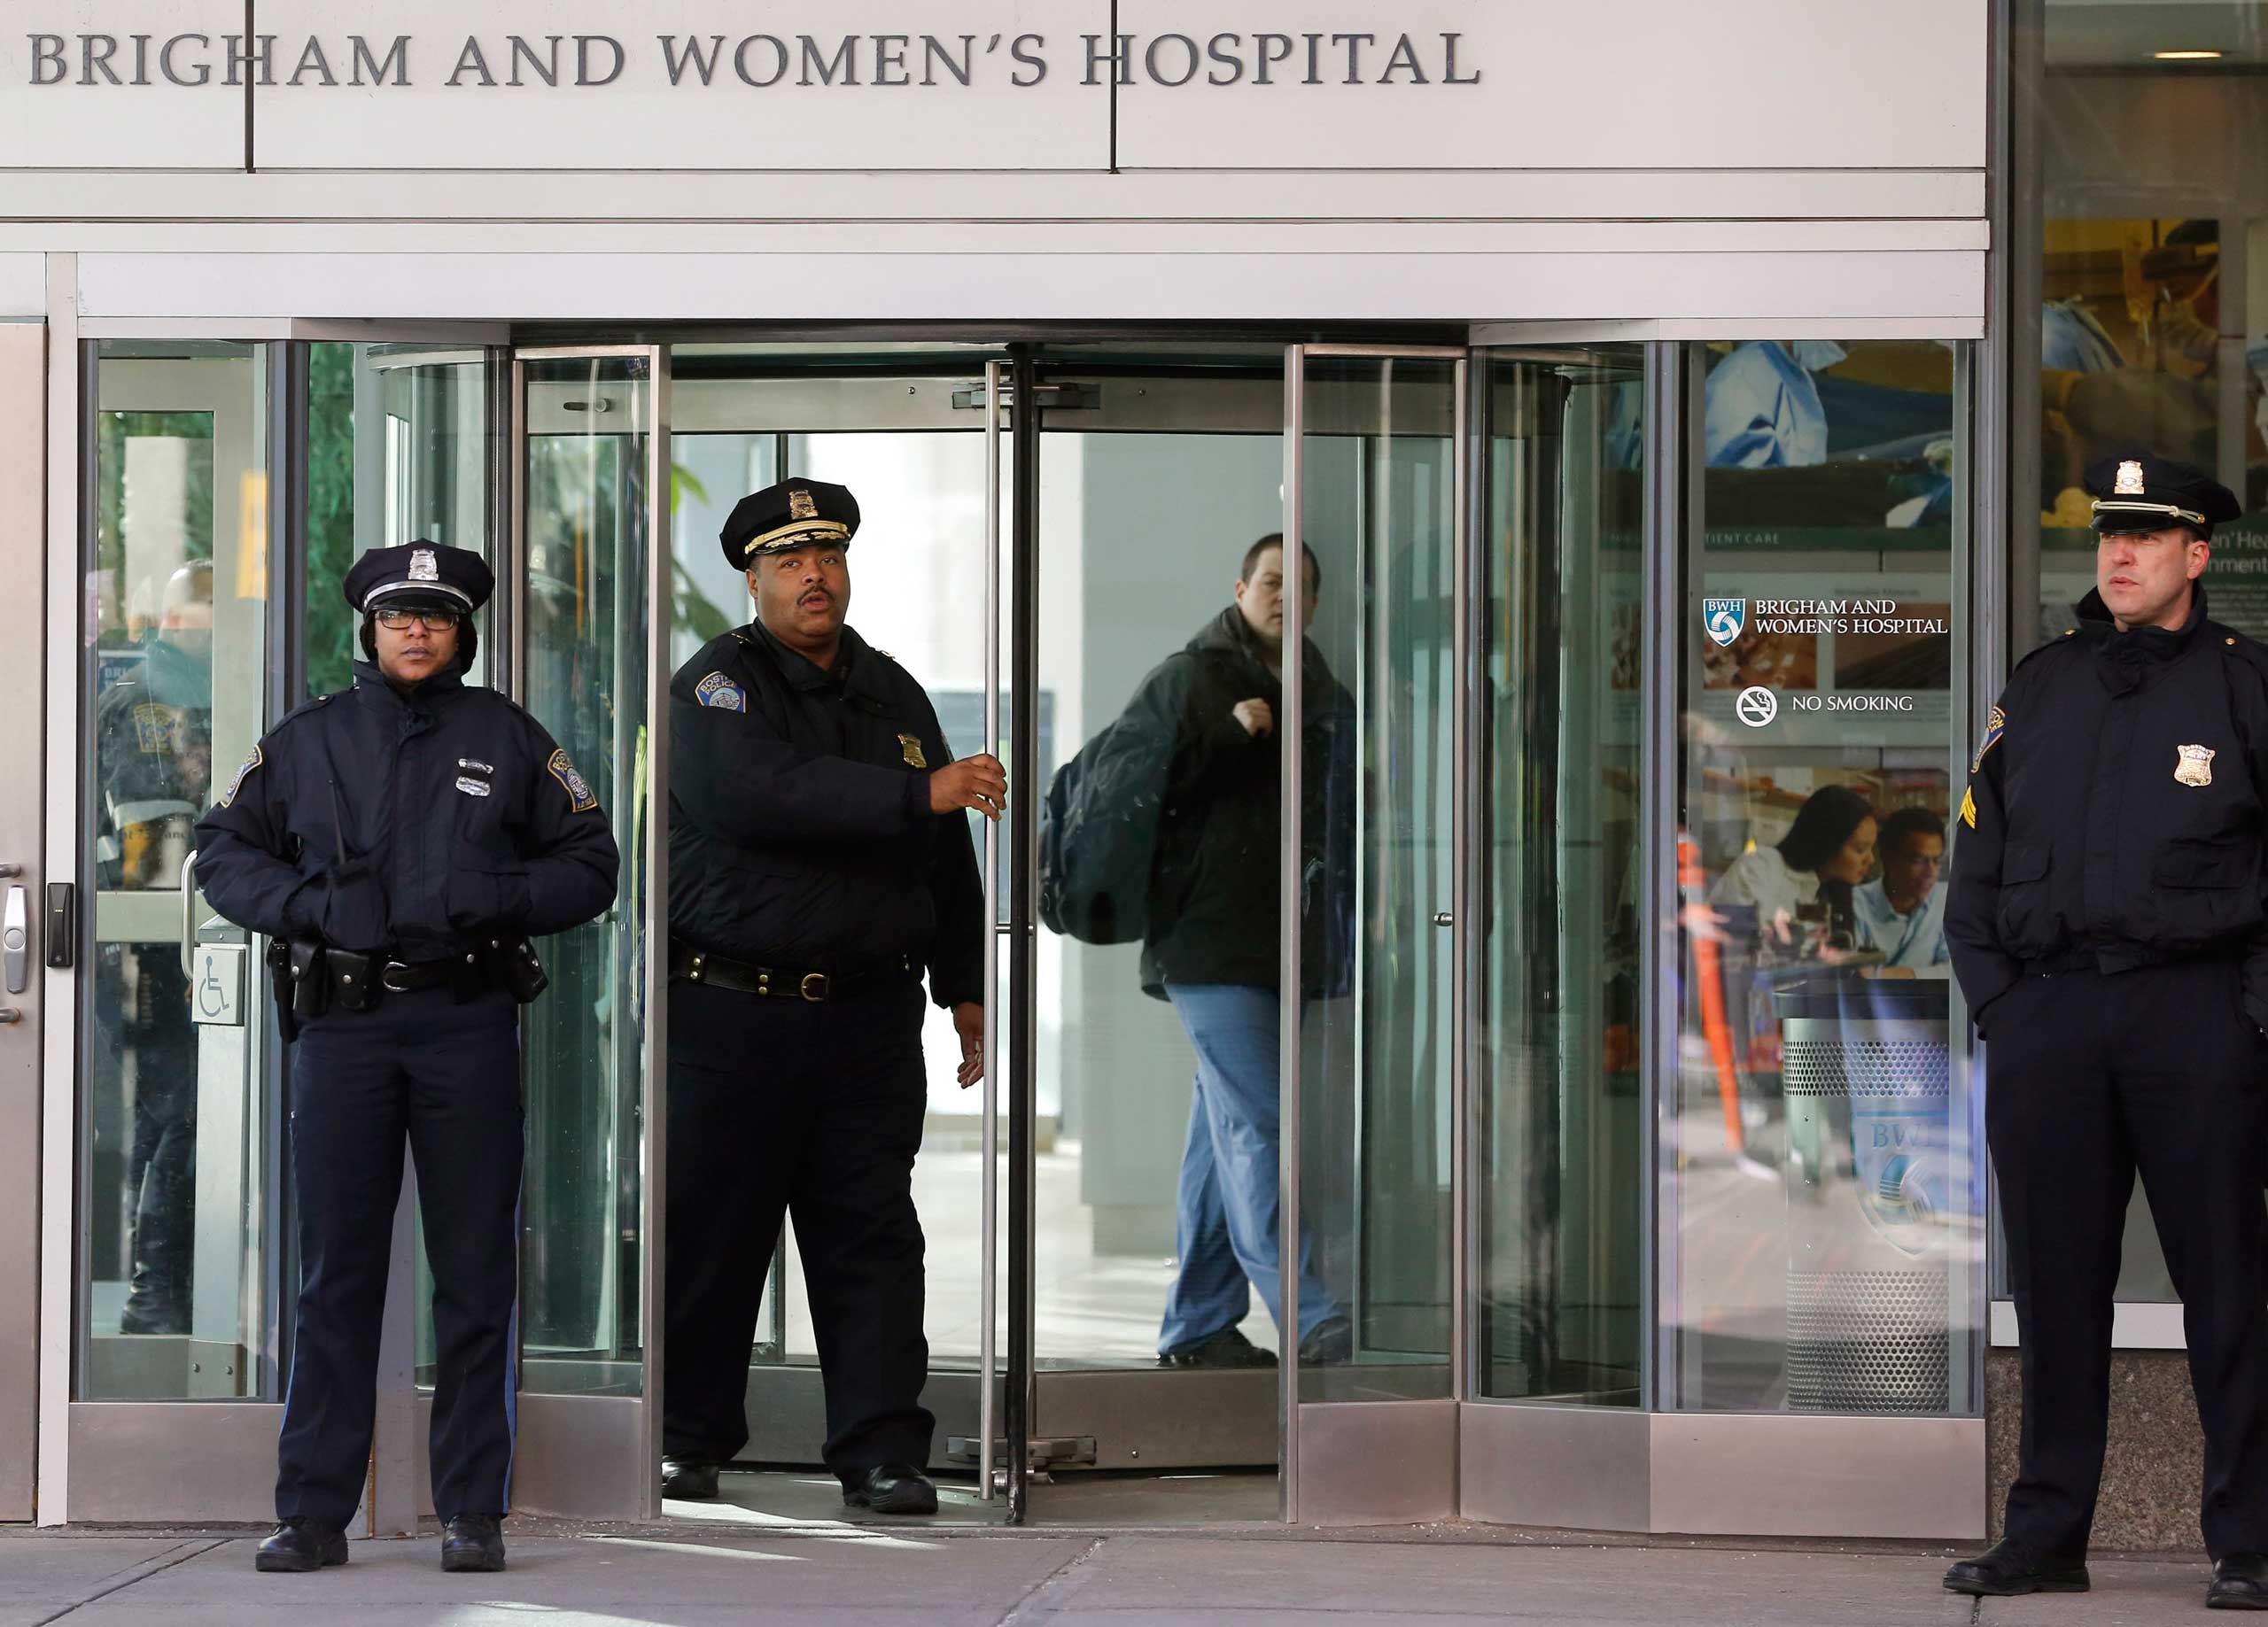 Boston Police Superintendent-in-Chief William Gross, center left, walks through a revolving door as he departs the Shapiro building at Brigham and Women's Hospital, Jan. 20, 2015 in Boston. (Steven Senne—AP)